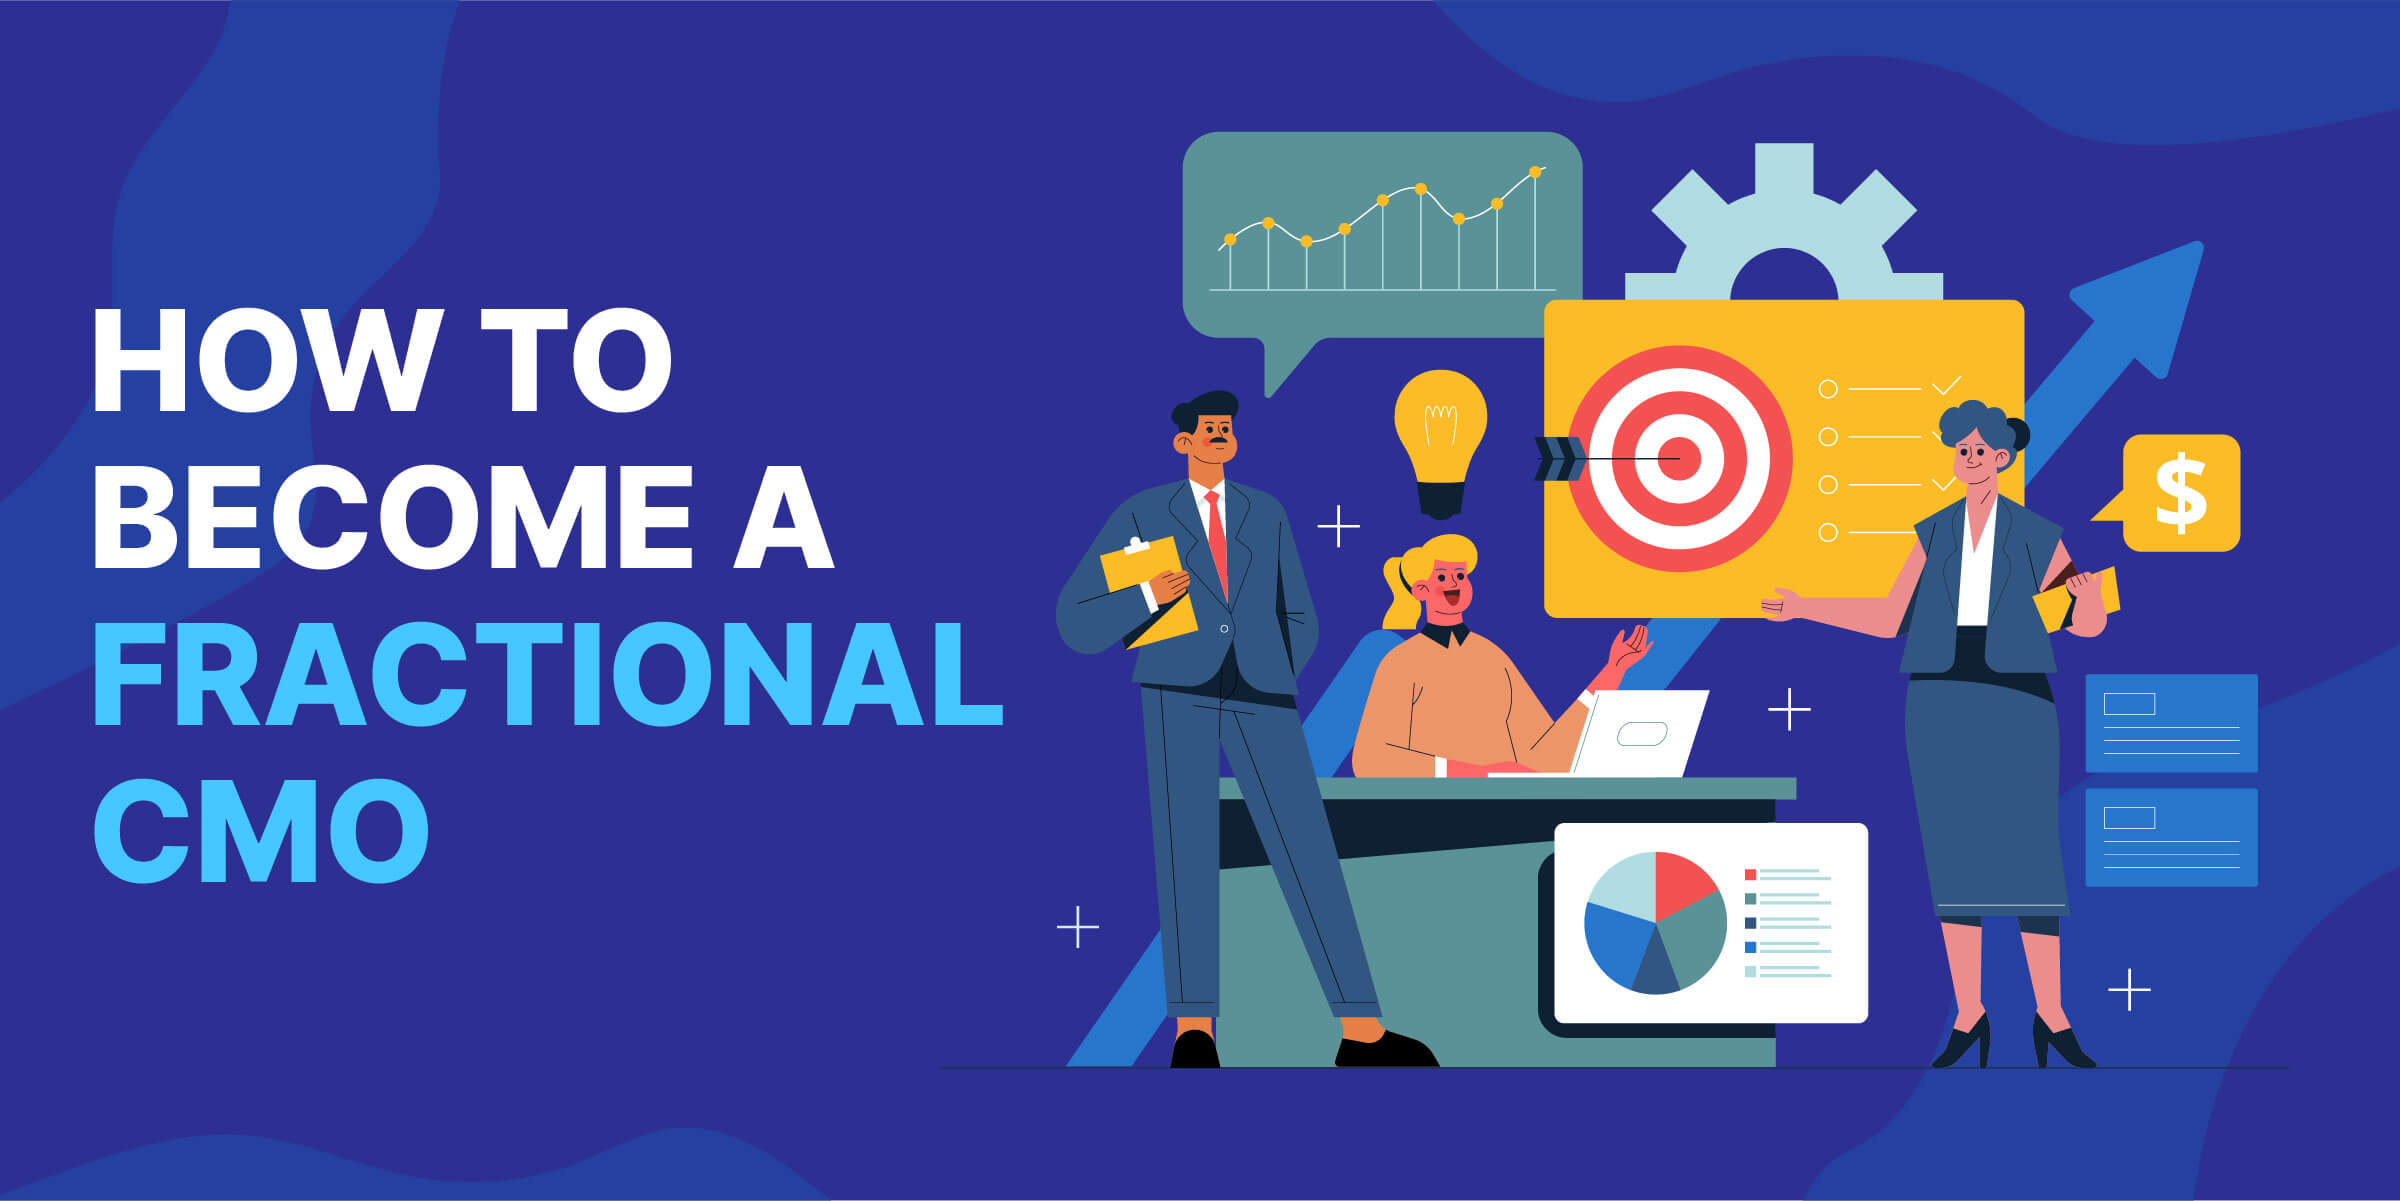 How to Become Fractional CMO